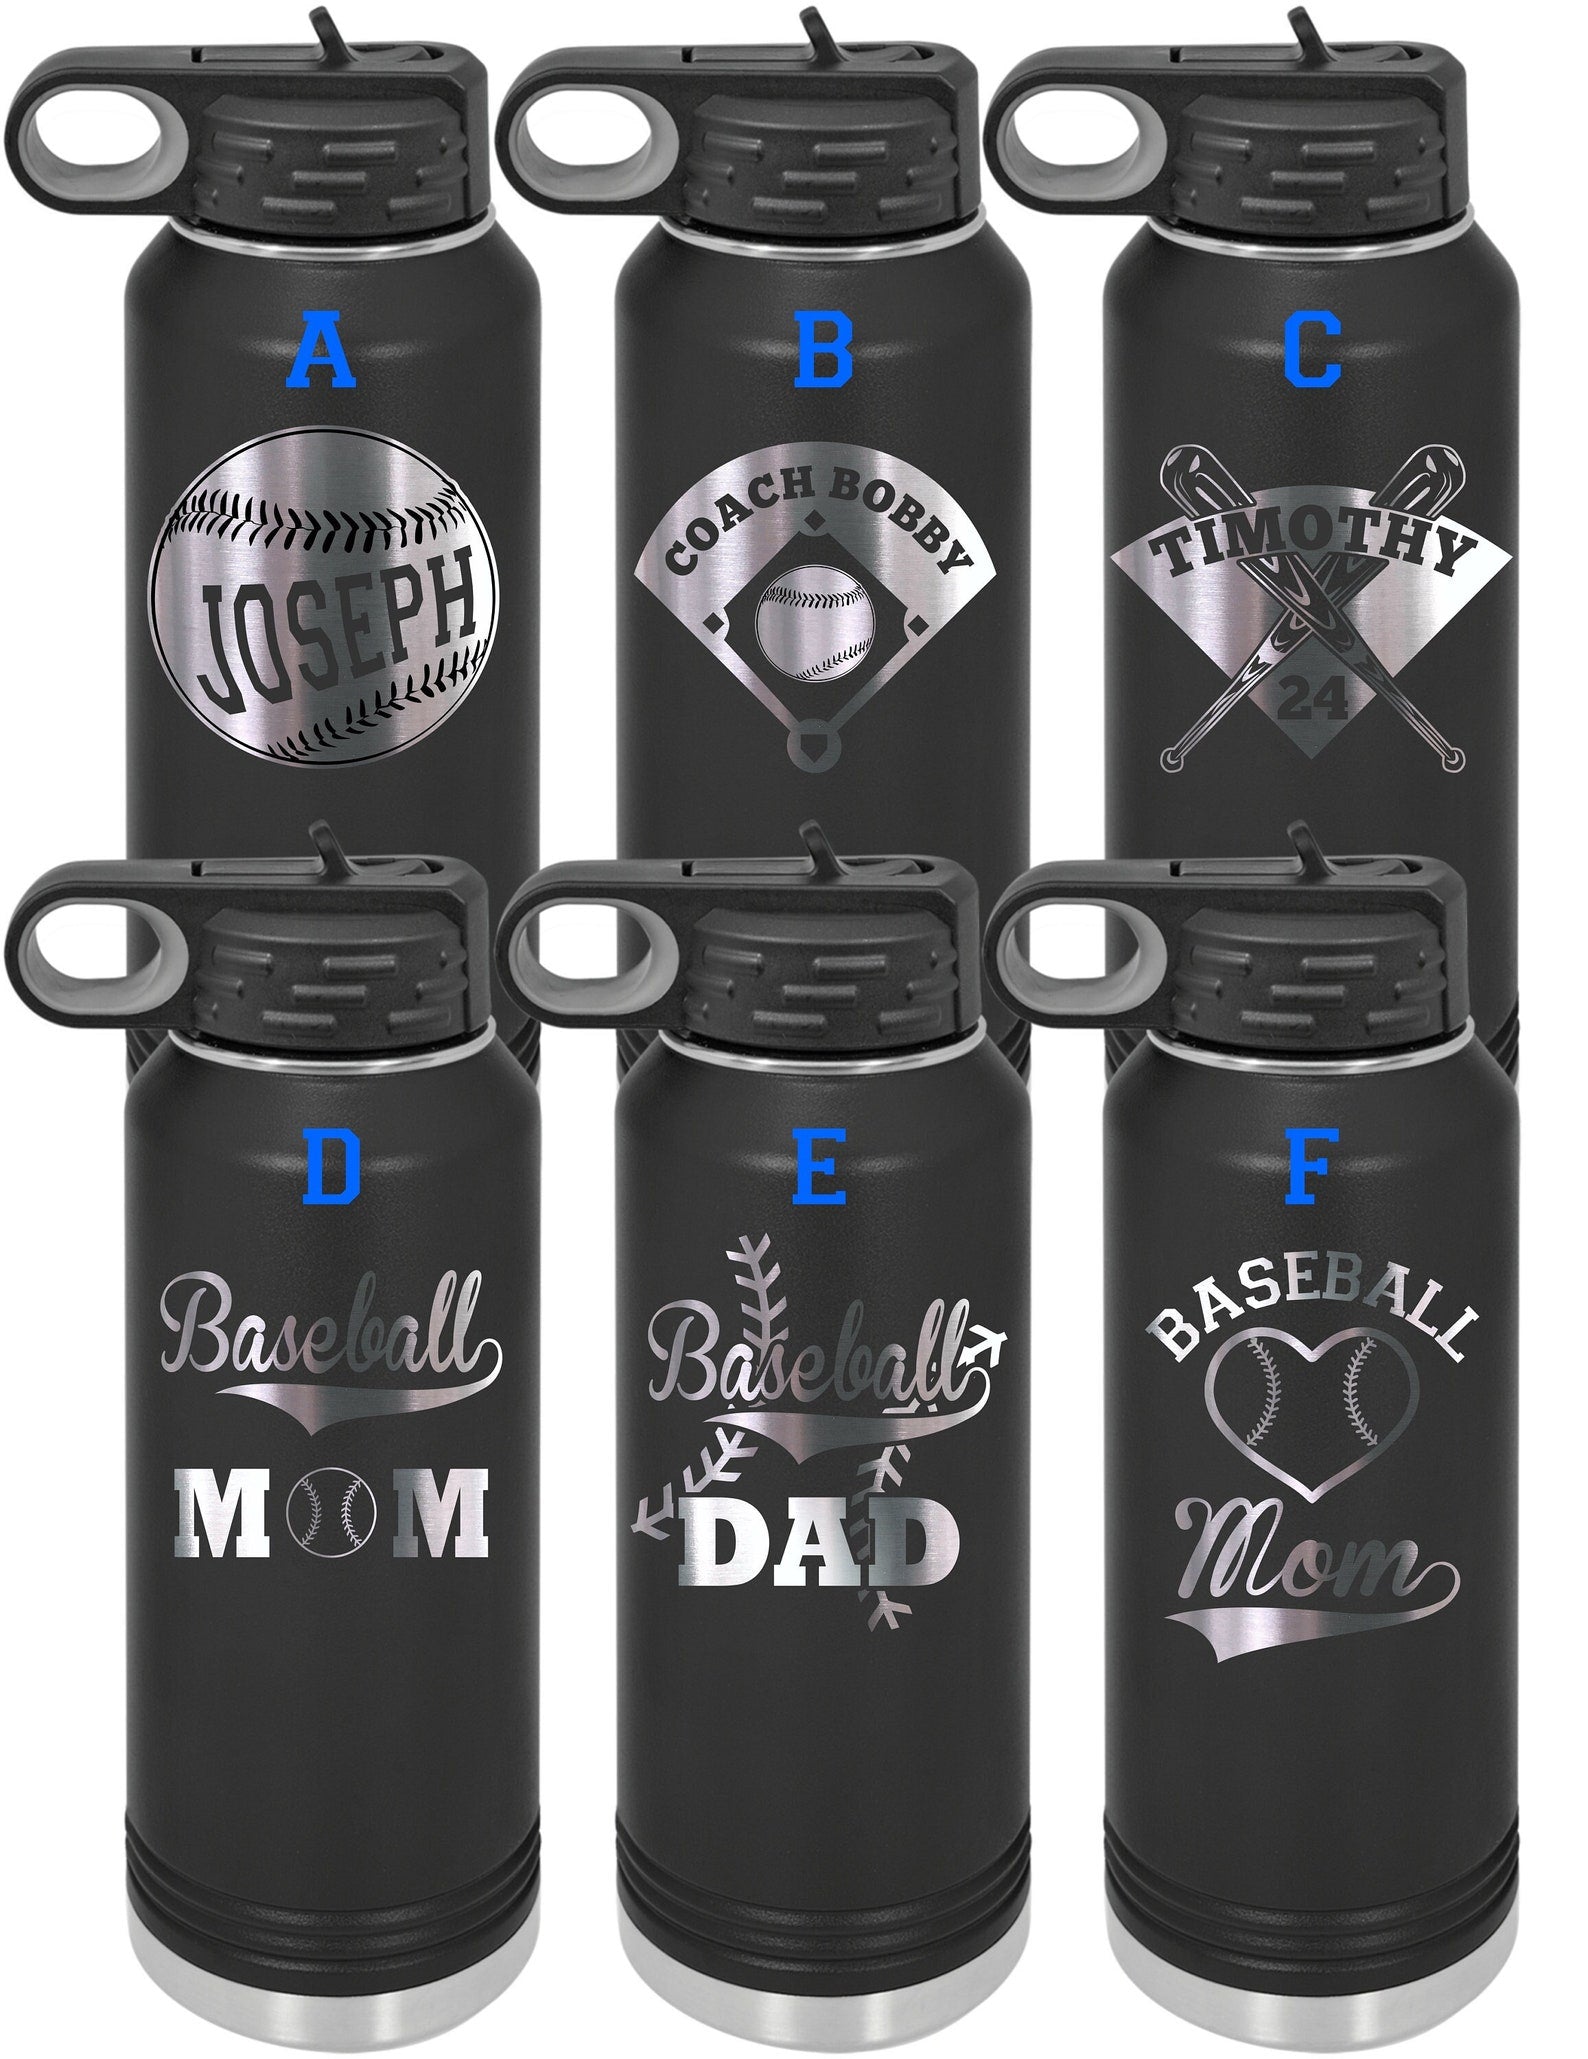  Hyturtle Personalized Baseball Water Bottle Baseball Players  Design Sports Bottles 12oz 18oz 32oz Insulated Stainless Steel Travel Cup  Christmas Gifts For Men Boys Friends Dad Sports Fan : Sports & Outdoors